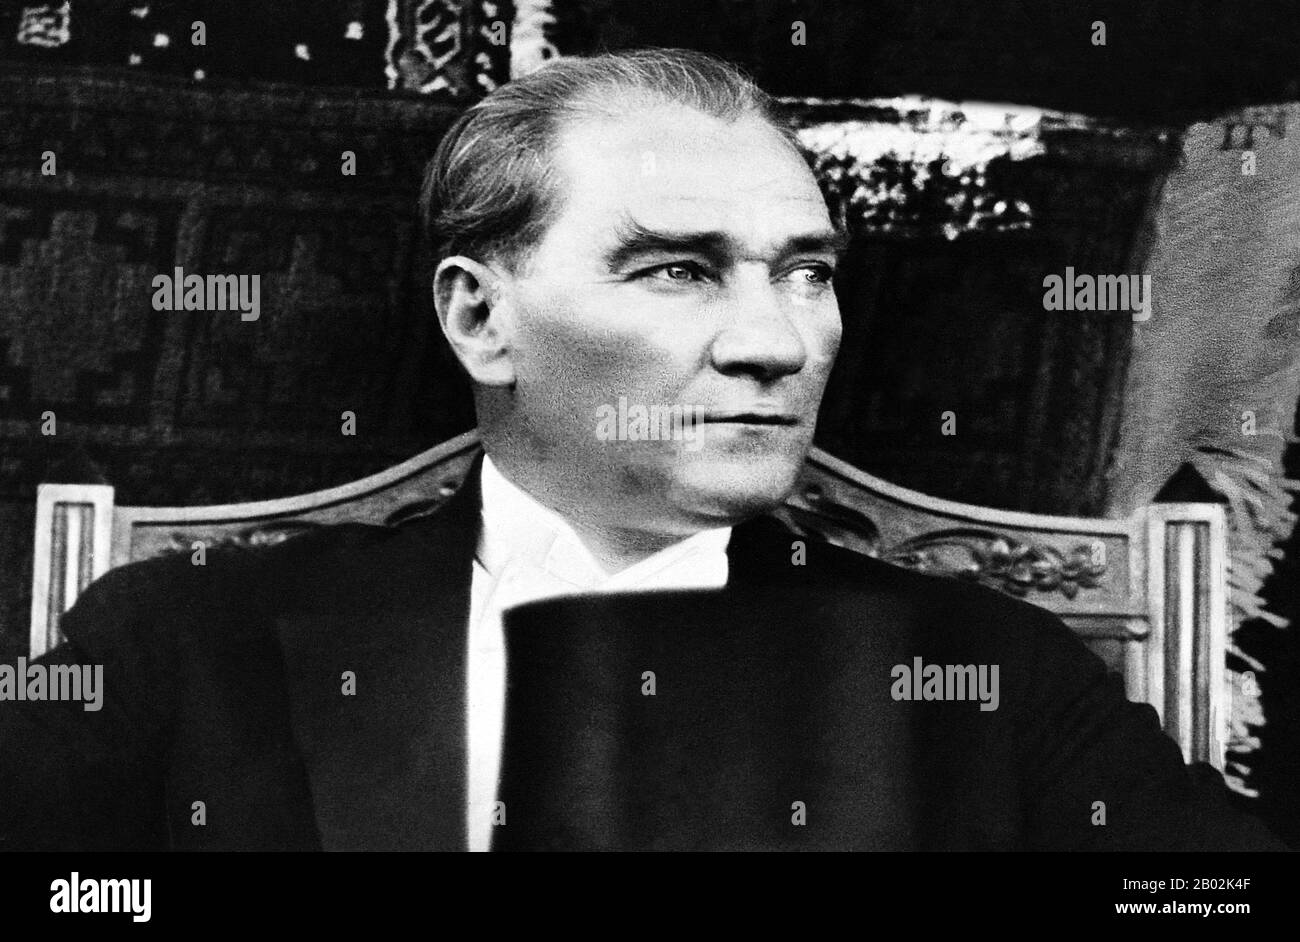 Mustafa Kemal Atatürk (1881–10 November 1938) was an Ottoman and Turkish army officer, revolutionary statesman, writer, and the first President of Turkey.  He is credited with being the founder of the modern Turkish state. Atatürk was a military officer during World War I. Following the defeat of the Ottoman Empire in World War I, he led the Turkish national movement in the Turkish War of Independence.  Having established a provisional government in Ankara, he defeated the forces sent by the Allies. His military campaigns gained Turkey independence. Atatürk then embarked upon a program of poli Stock Photo